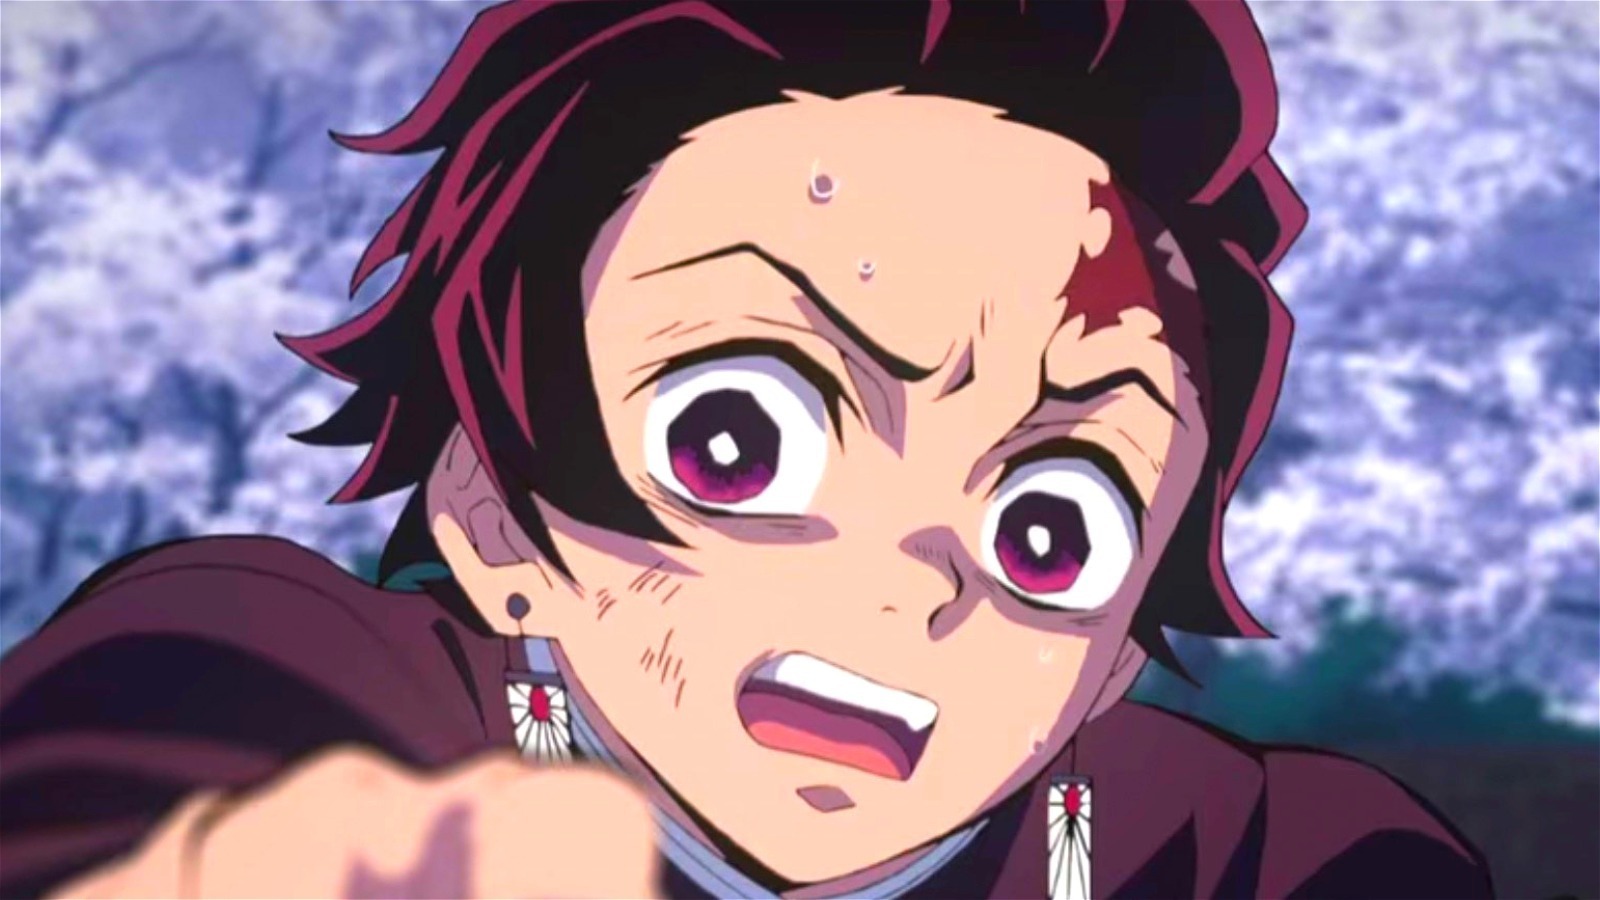 They can't handle peak”: Fans Throw Shade at Demon Slayer After